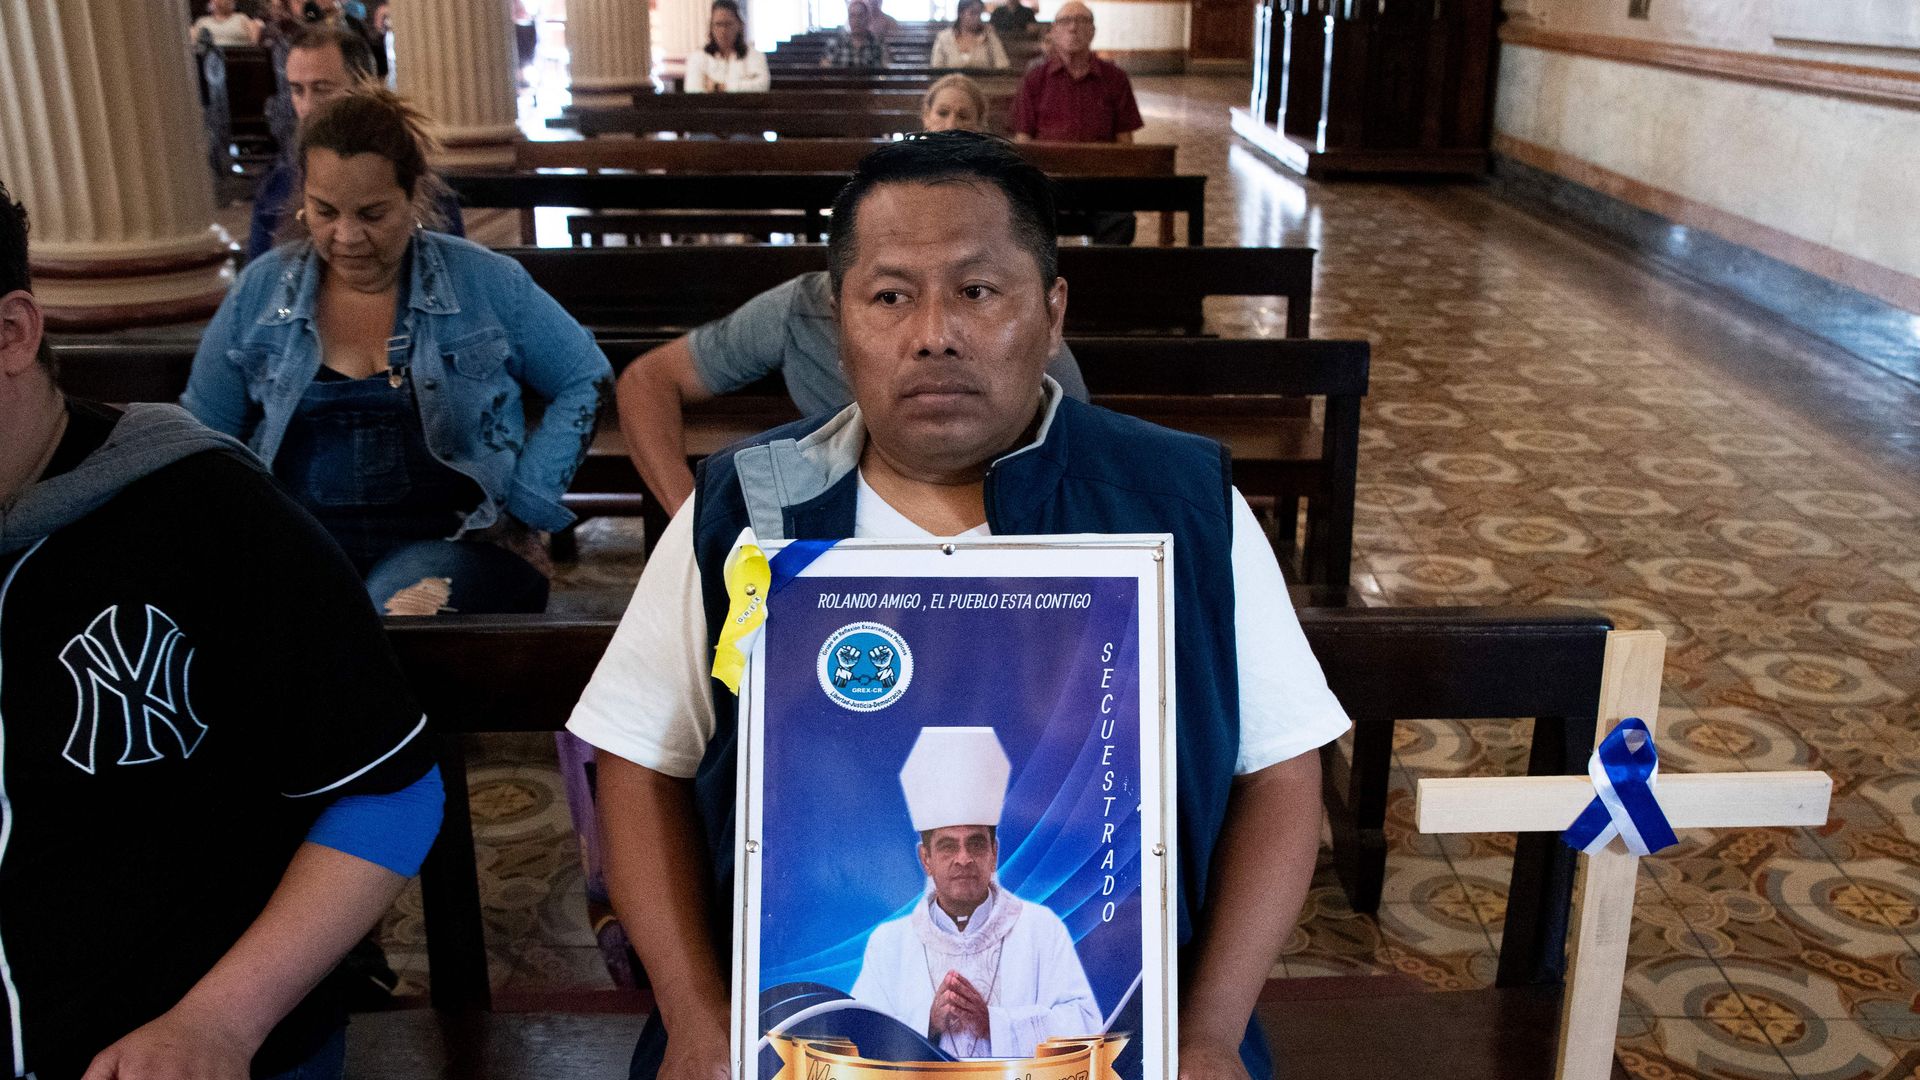 A man sitting on a church pew holds a picture of a Catholic bishop who was exiled from Nicaragua 